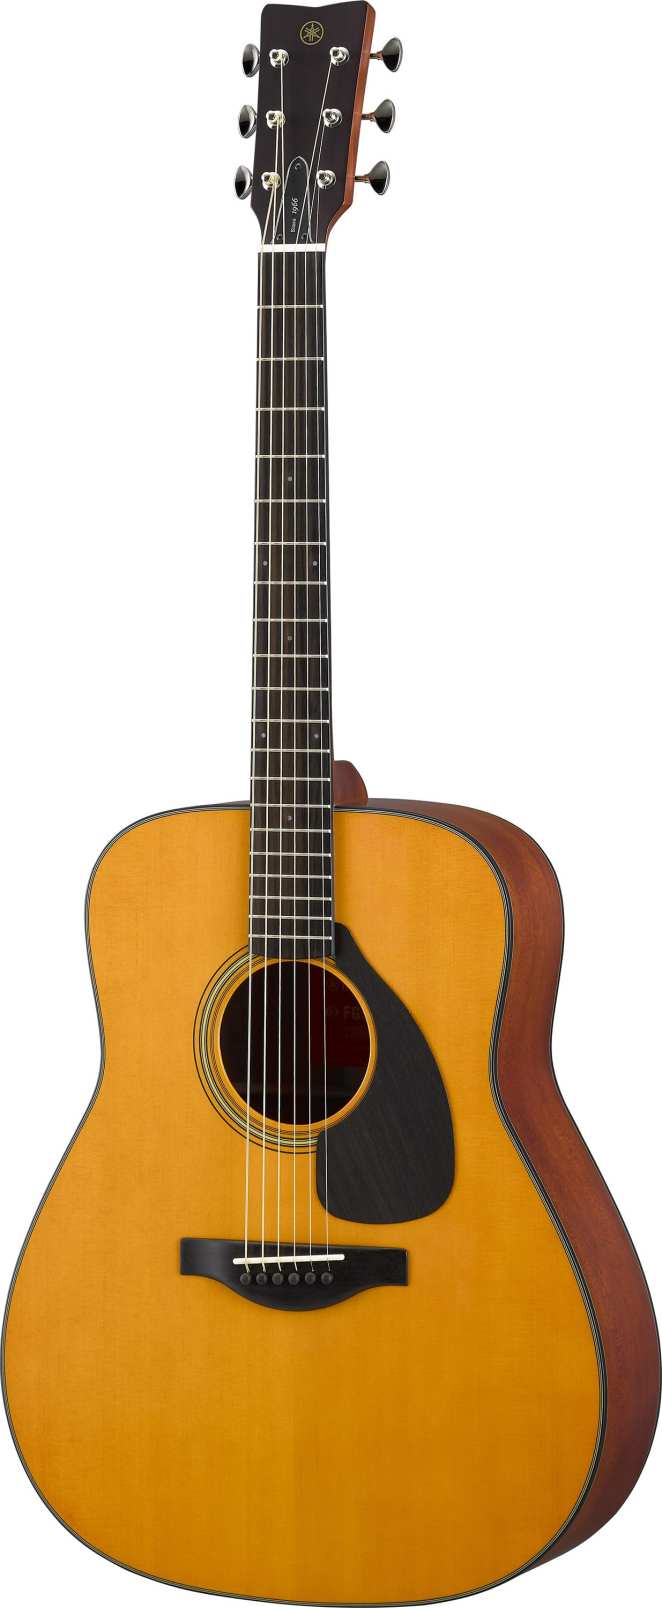 Yamaha FG Red Label Acoustic Guitars Merge Timeless Design with Cutting-Edge Technology